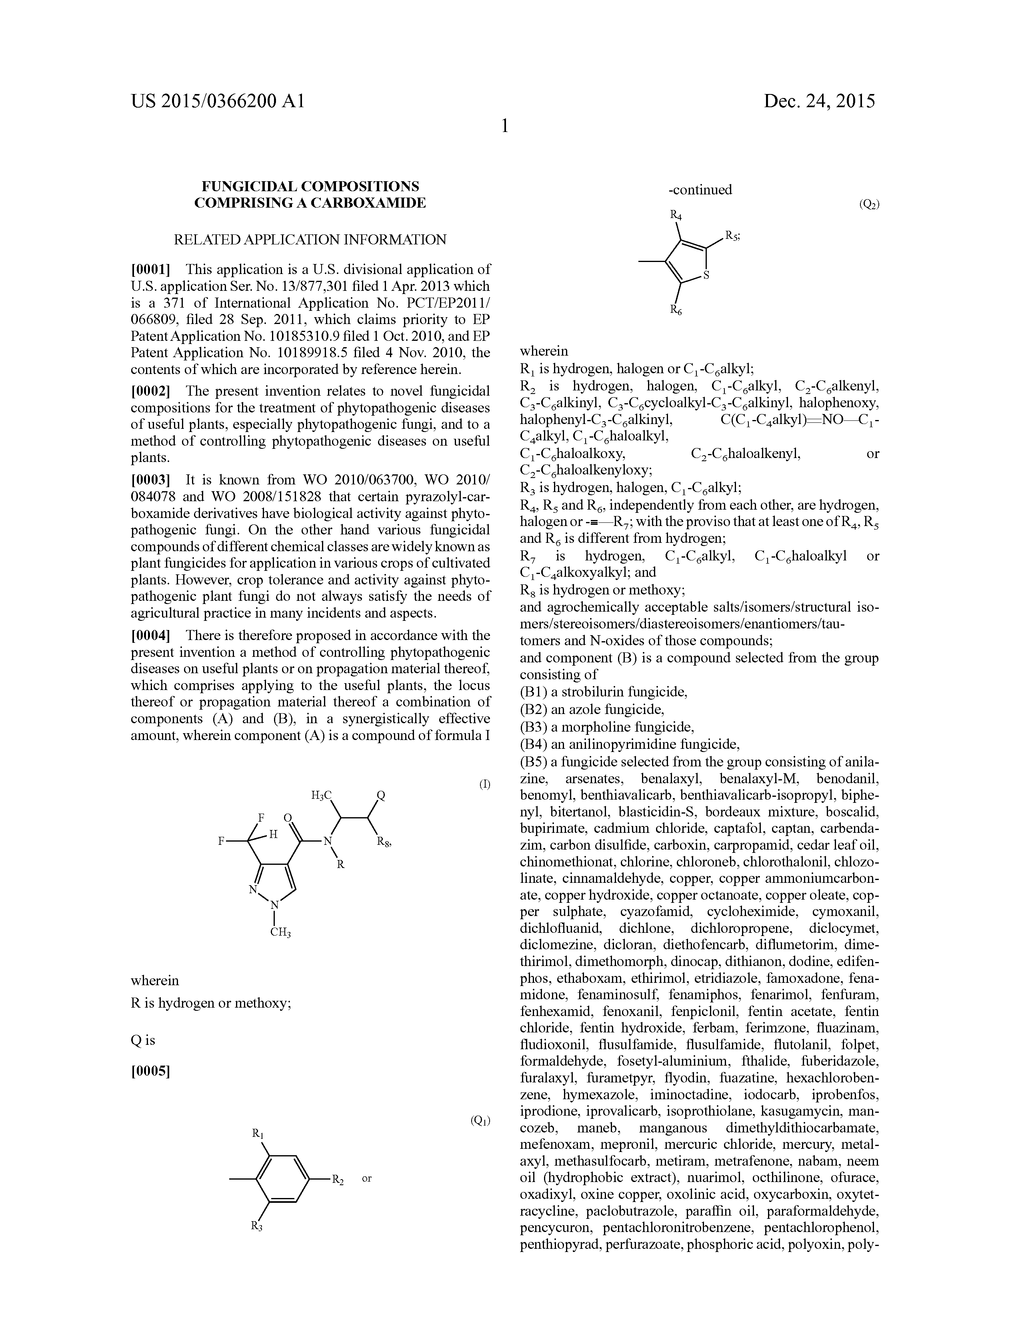 FUNGICIDAL COMPOSITIONS COMPRISING A CARBOXAMIDE - diagram, schematic, and image 02